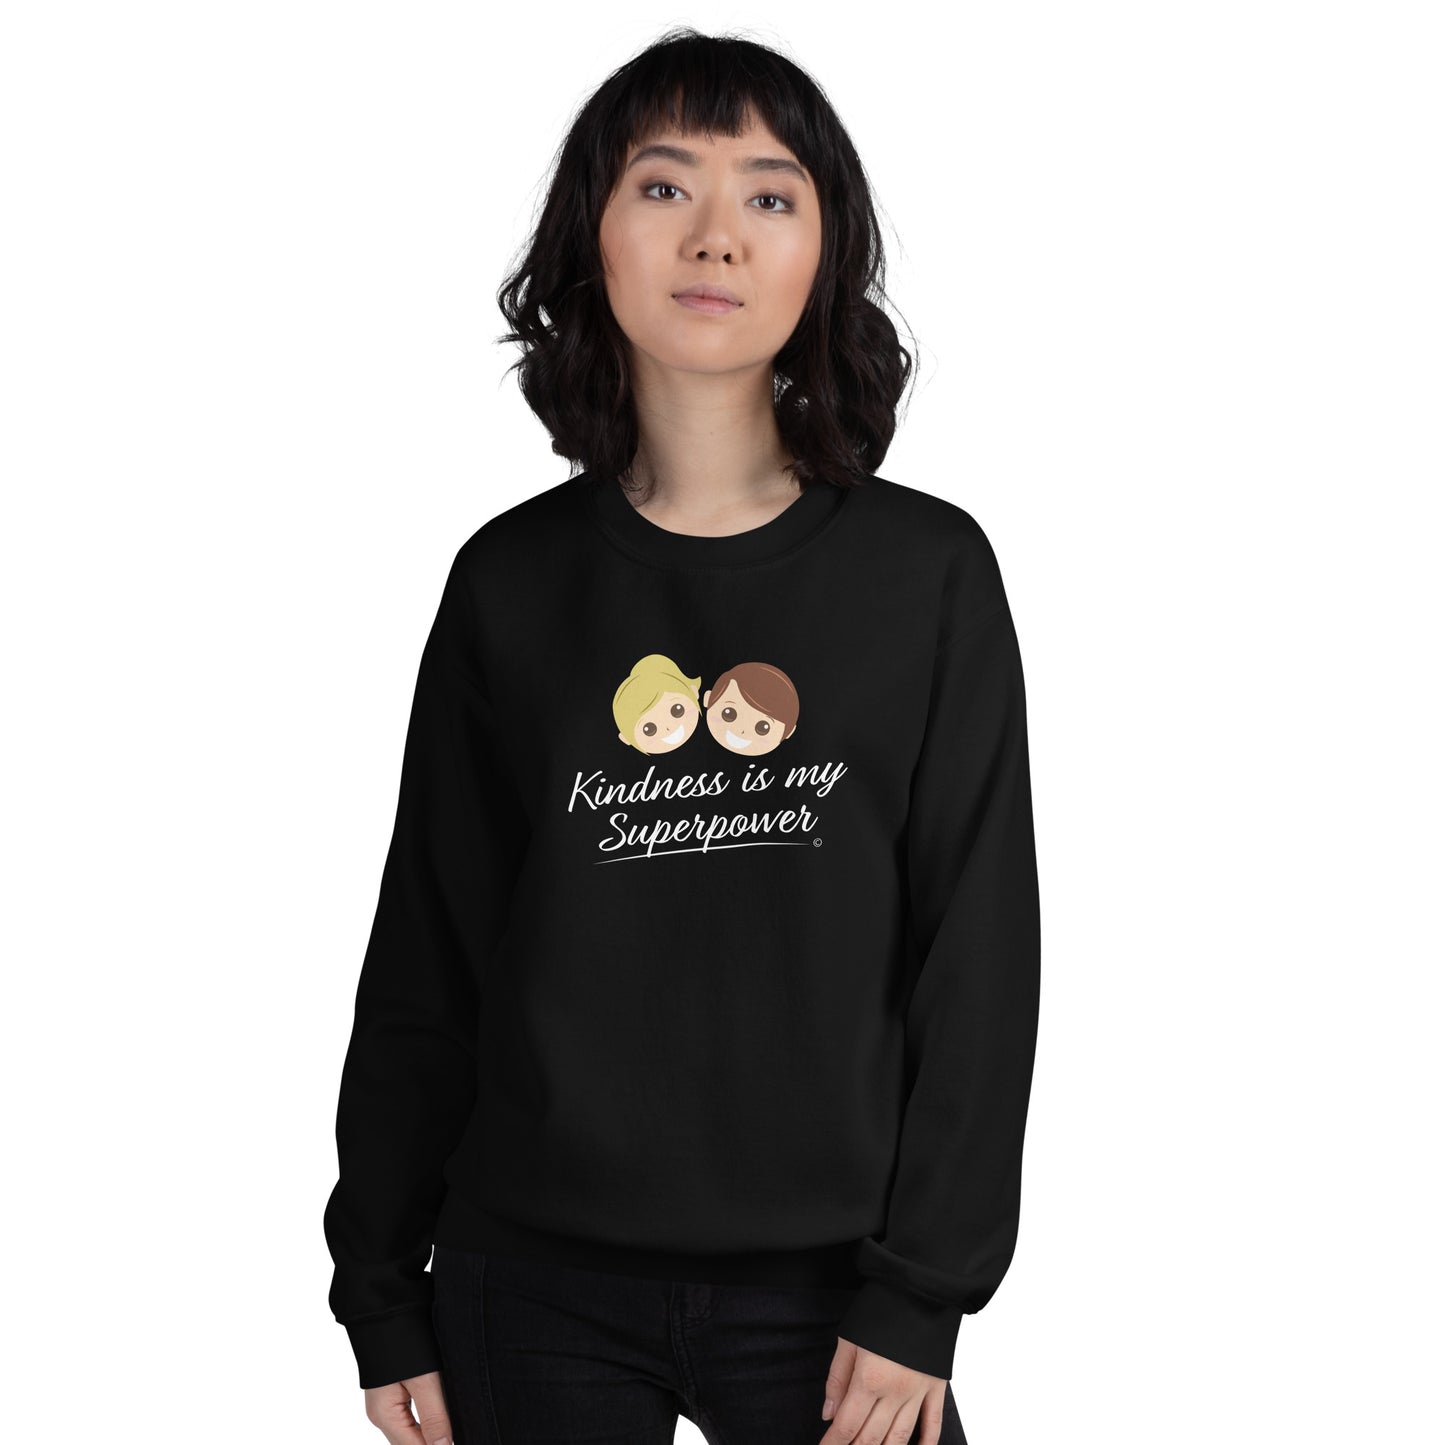 A stylish  woman confidently modeling a cozy unisex sweatshirt in black, both adorned with the empowering quote 'Kindness is my Superpower' in bold lettering.